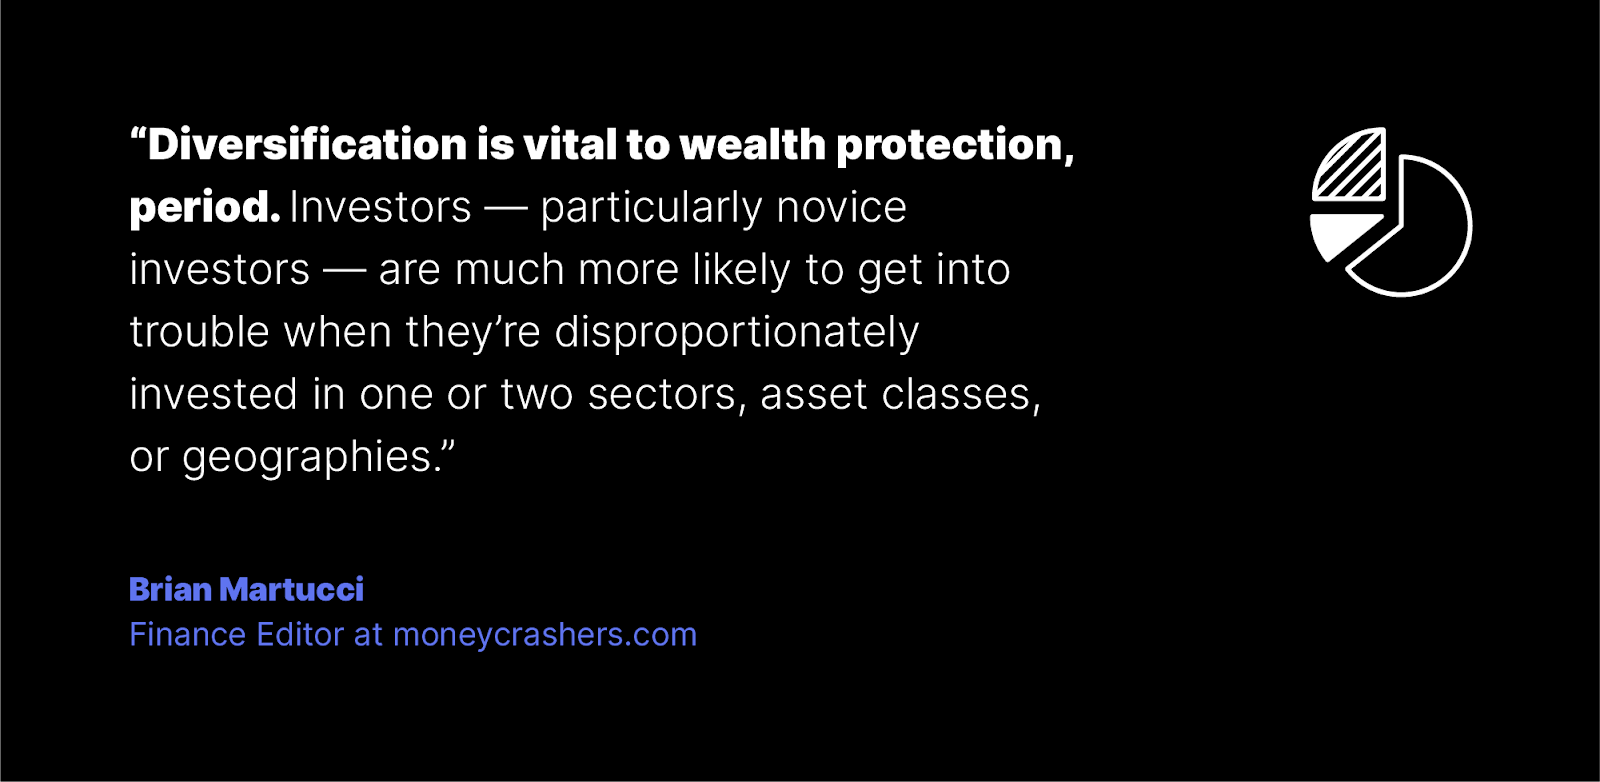 Brian Martucci, Finance Editor at moneycrashers.com, said "Diversification is vital to wealth protection, period. Investors - particularly novice investors - are much more likely to get into trouble when they